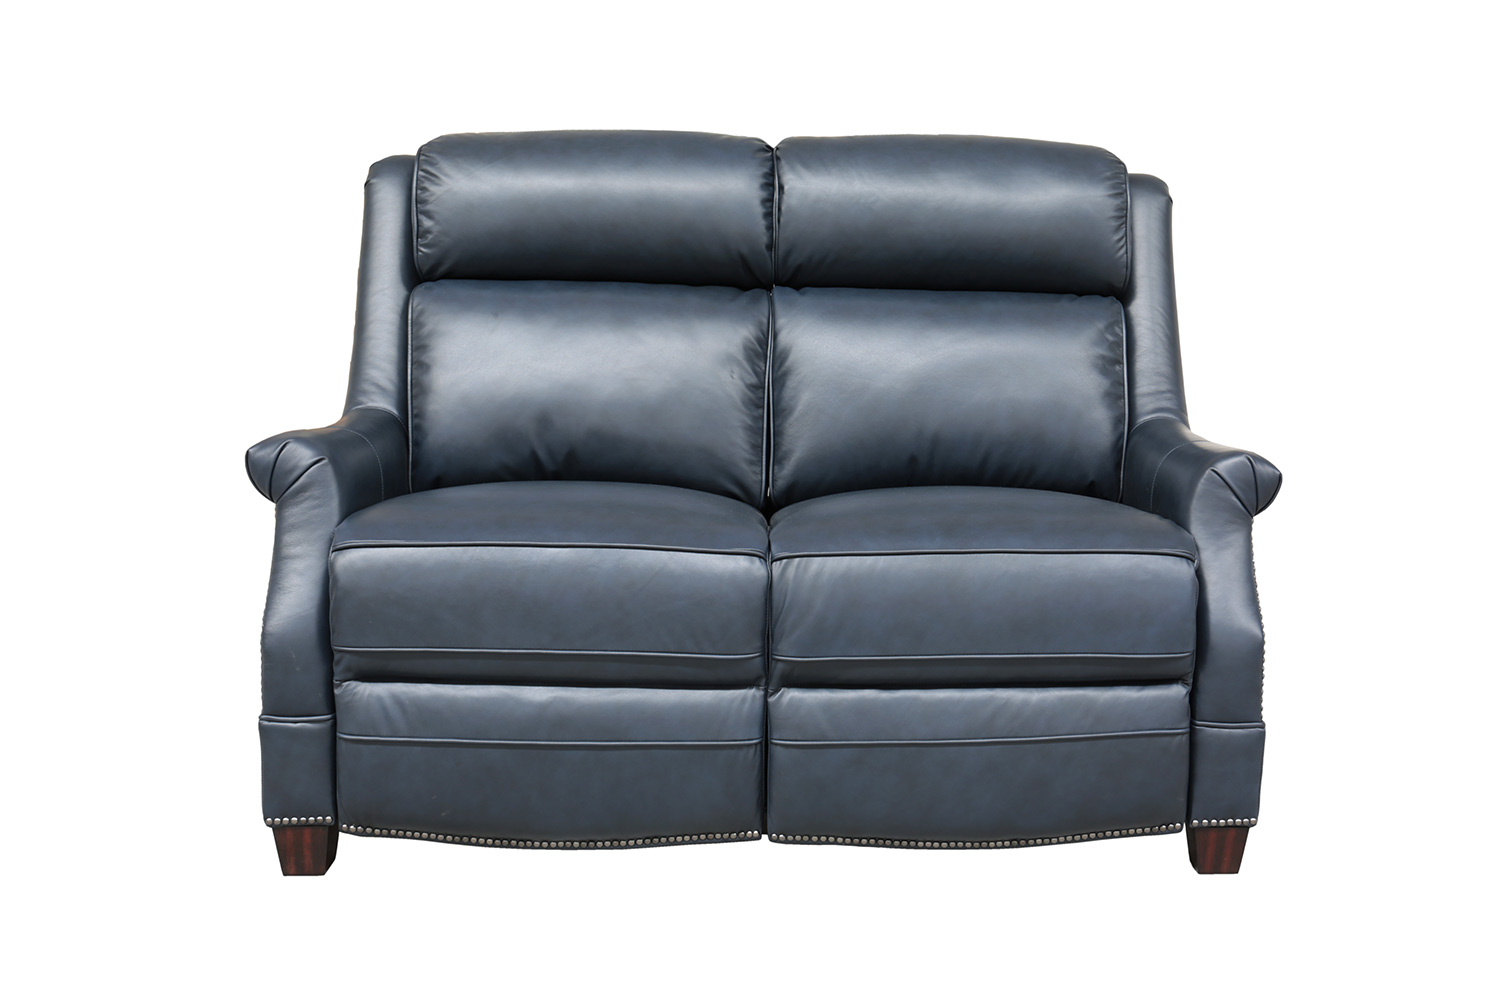 Barcalounger Warrendale Power Reclining Loveseat with Power Head Rests - Shoreham Blue/All Leather